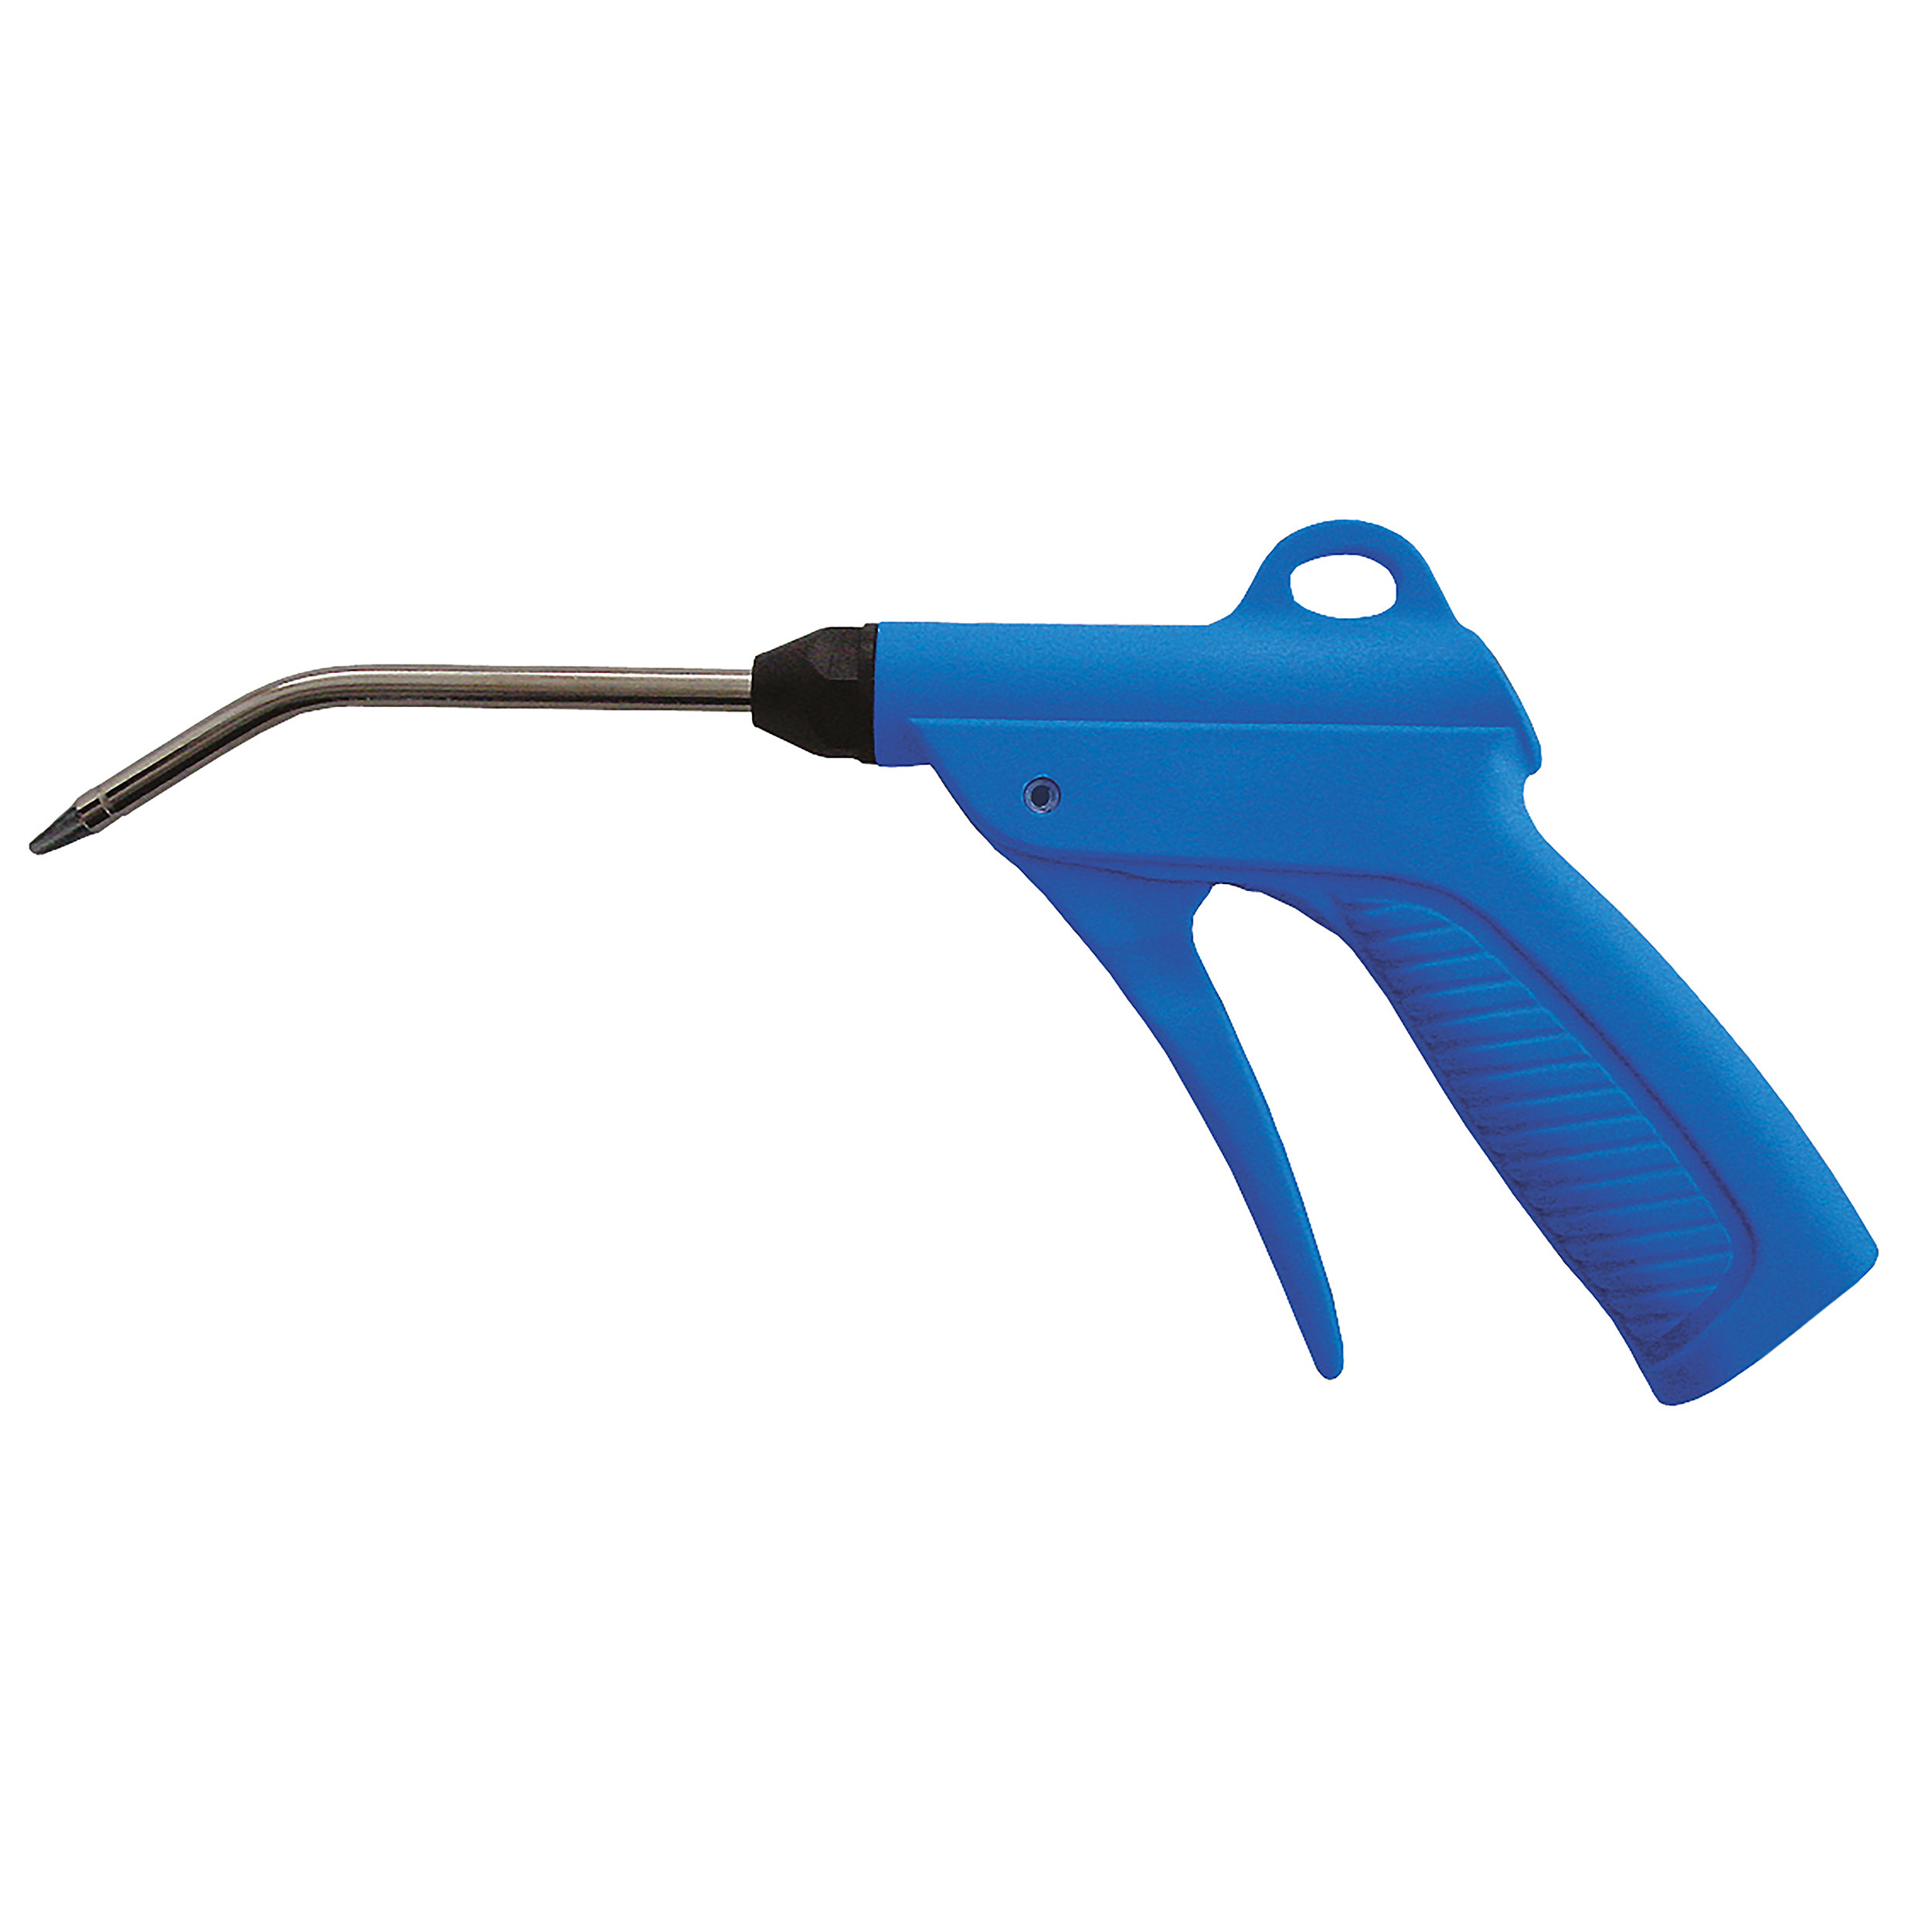 Blow gun, polyamide, MOP 145 psi/10 bar, noise reducing and safety nozzle safetystar: hole-Ø2.3 mm, length: 120 mm; G¼ female